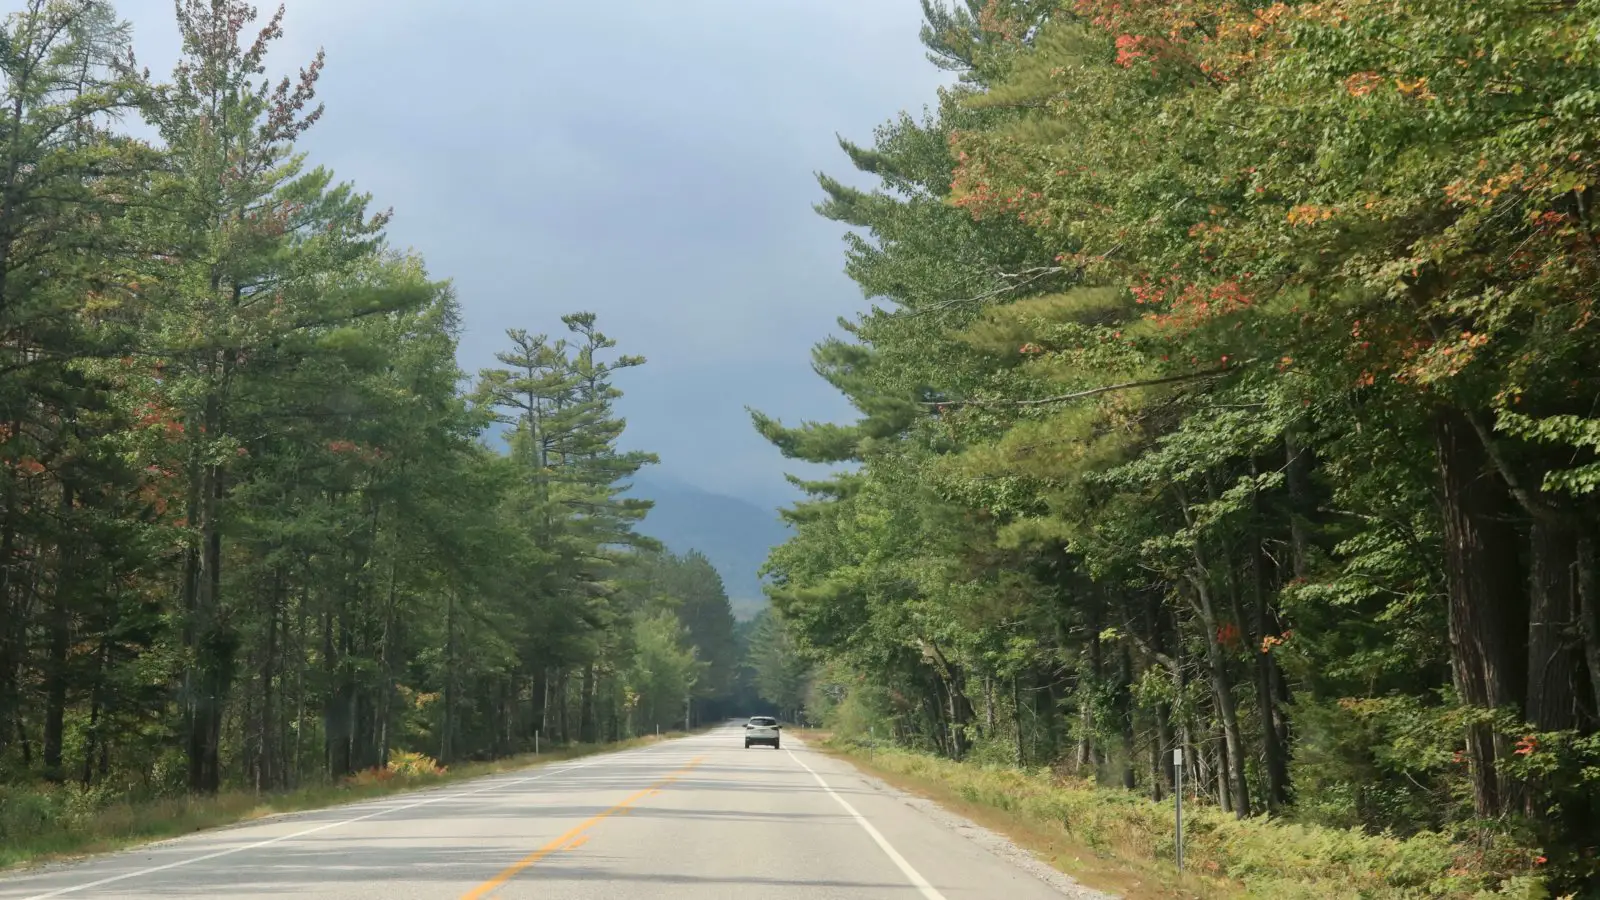 Driving the Kancamagus Highway through New Hampshire on our first family road trip